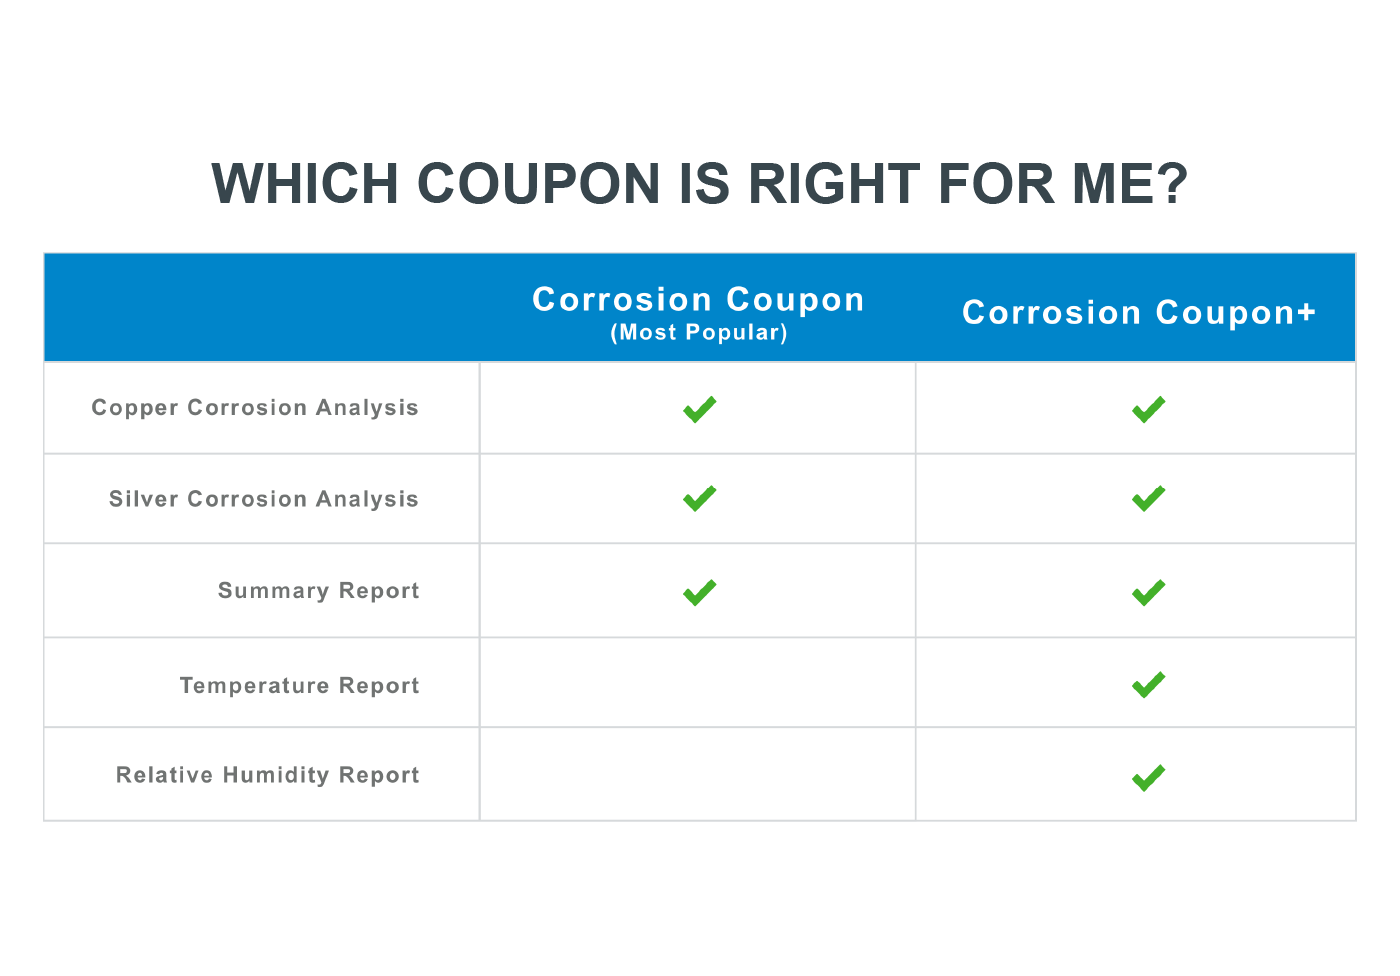 Corrosion Coupon